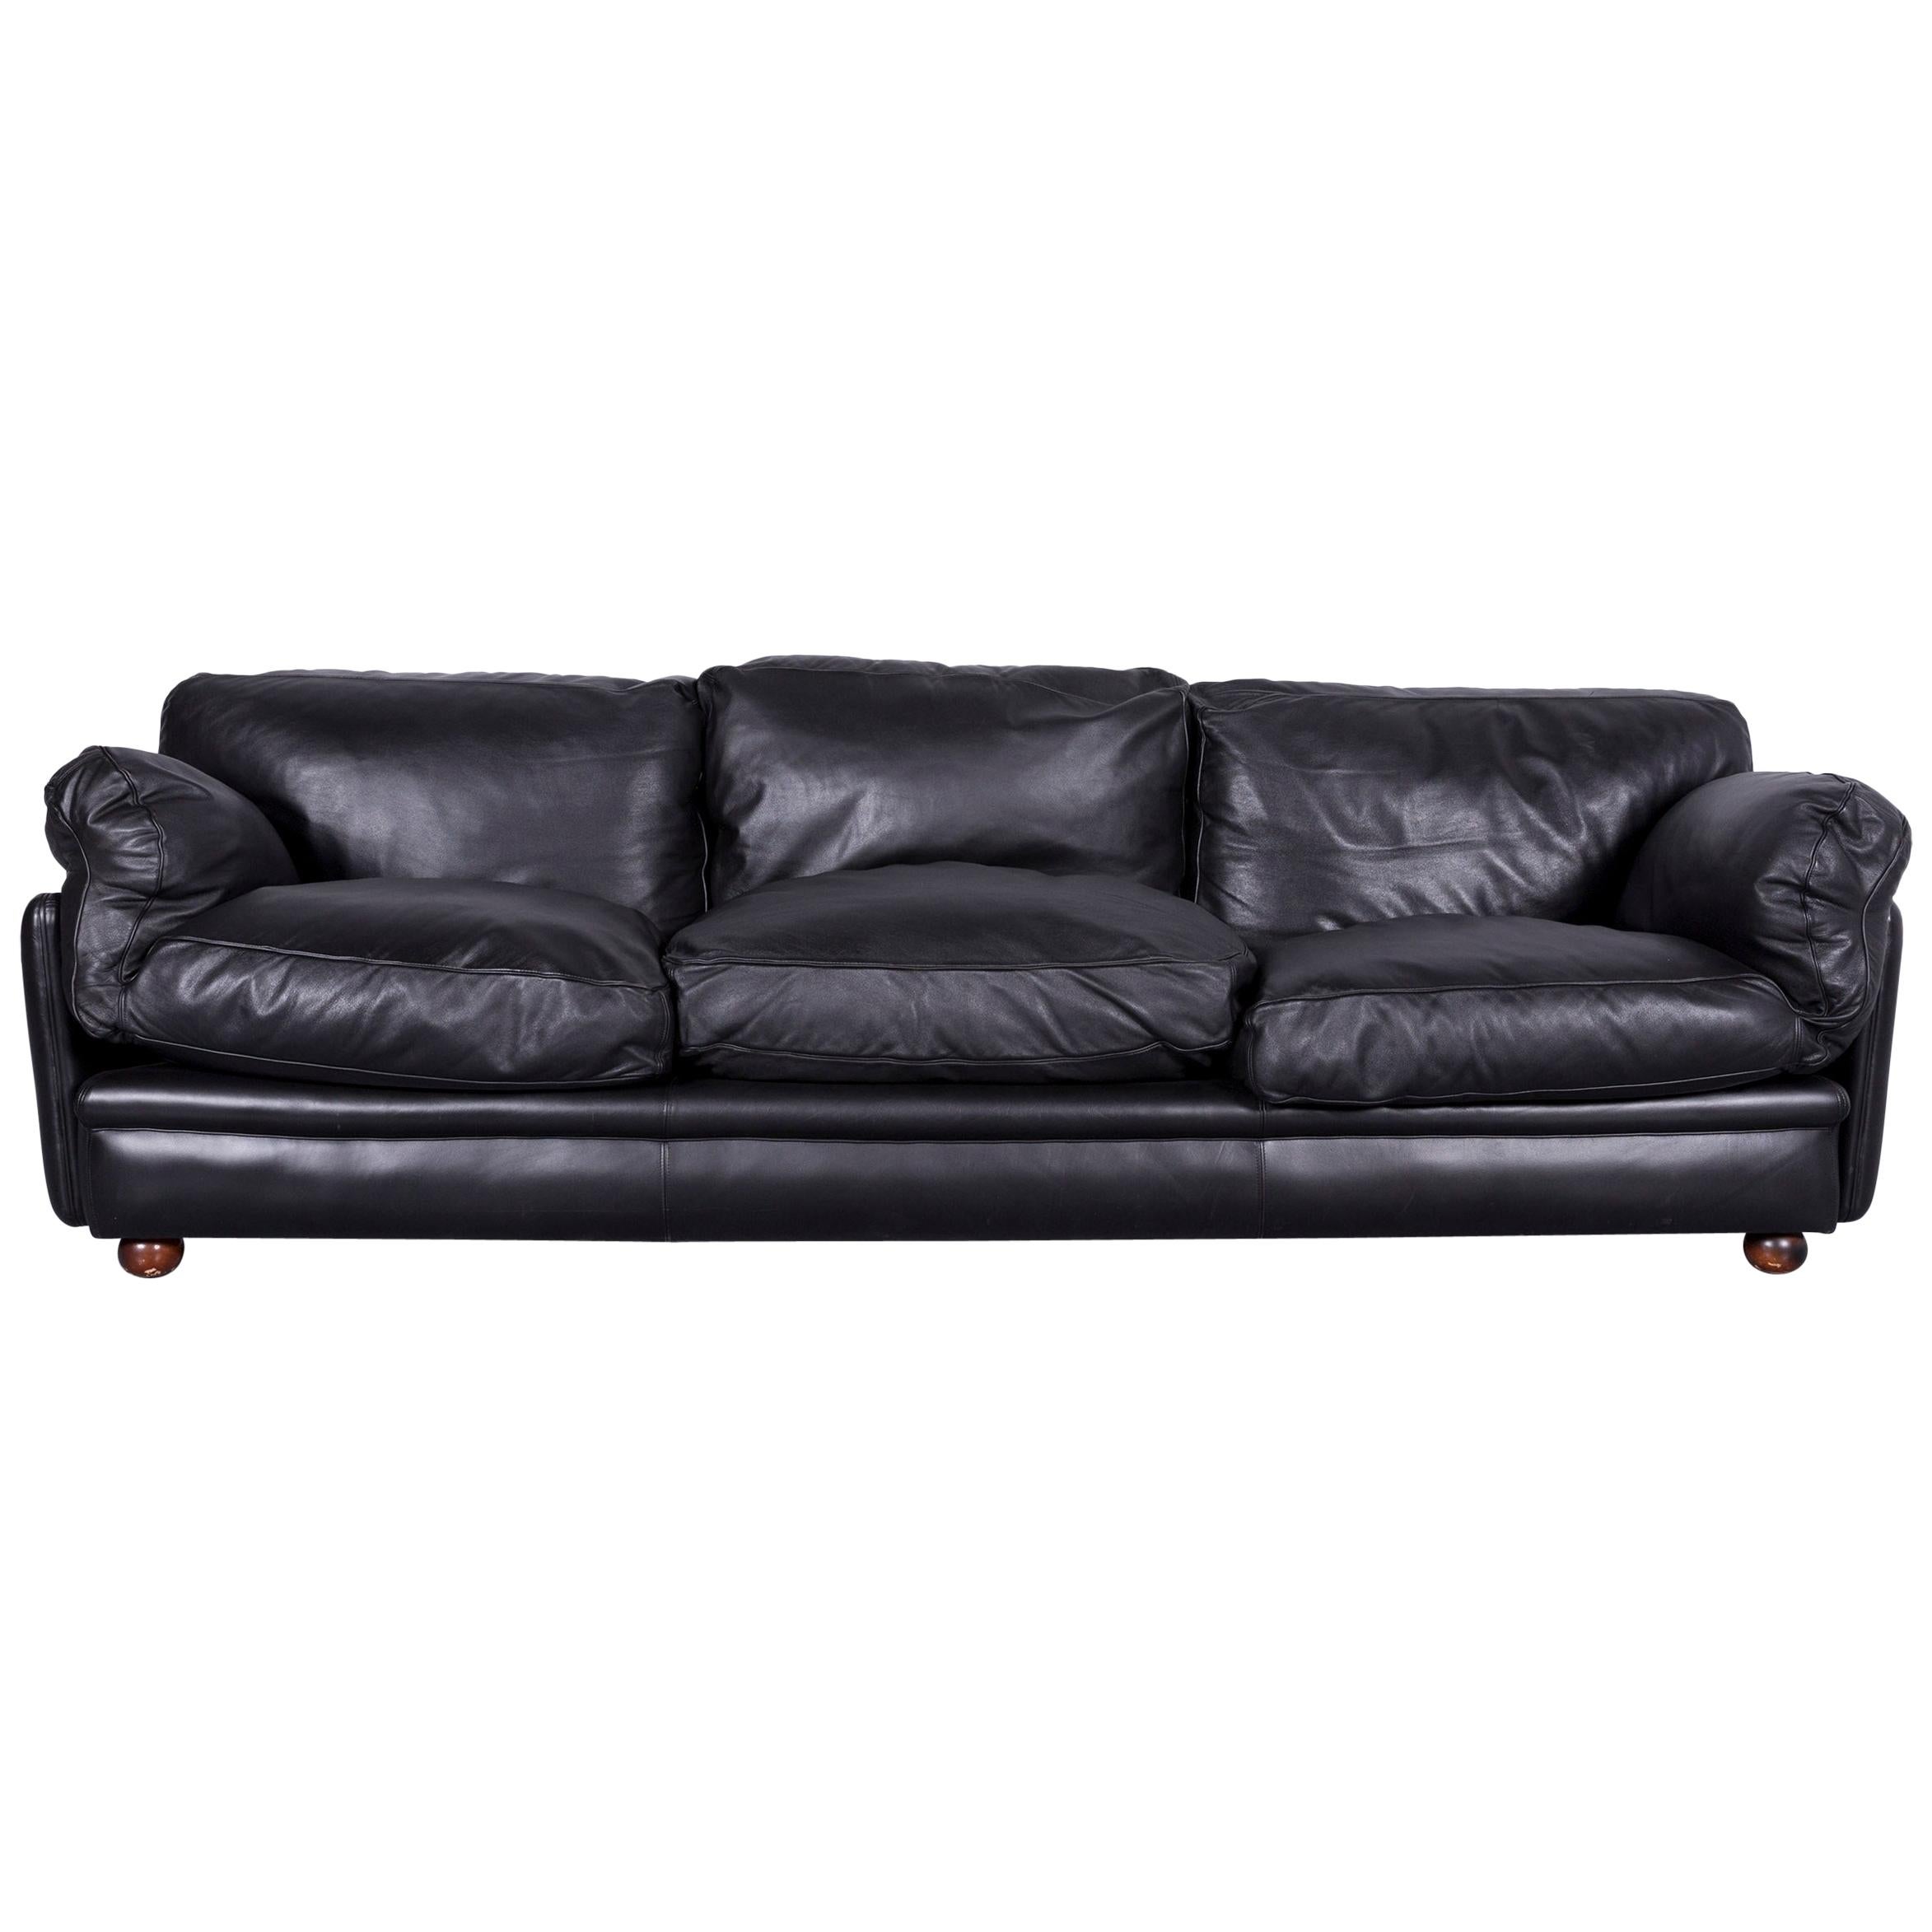 Poltrona Frau Leather Sofa Black Genuine Leather Three-Seat Couch For Sale